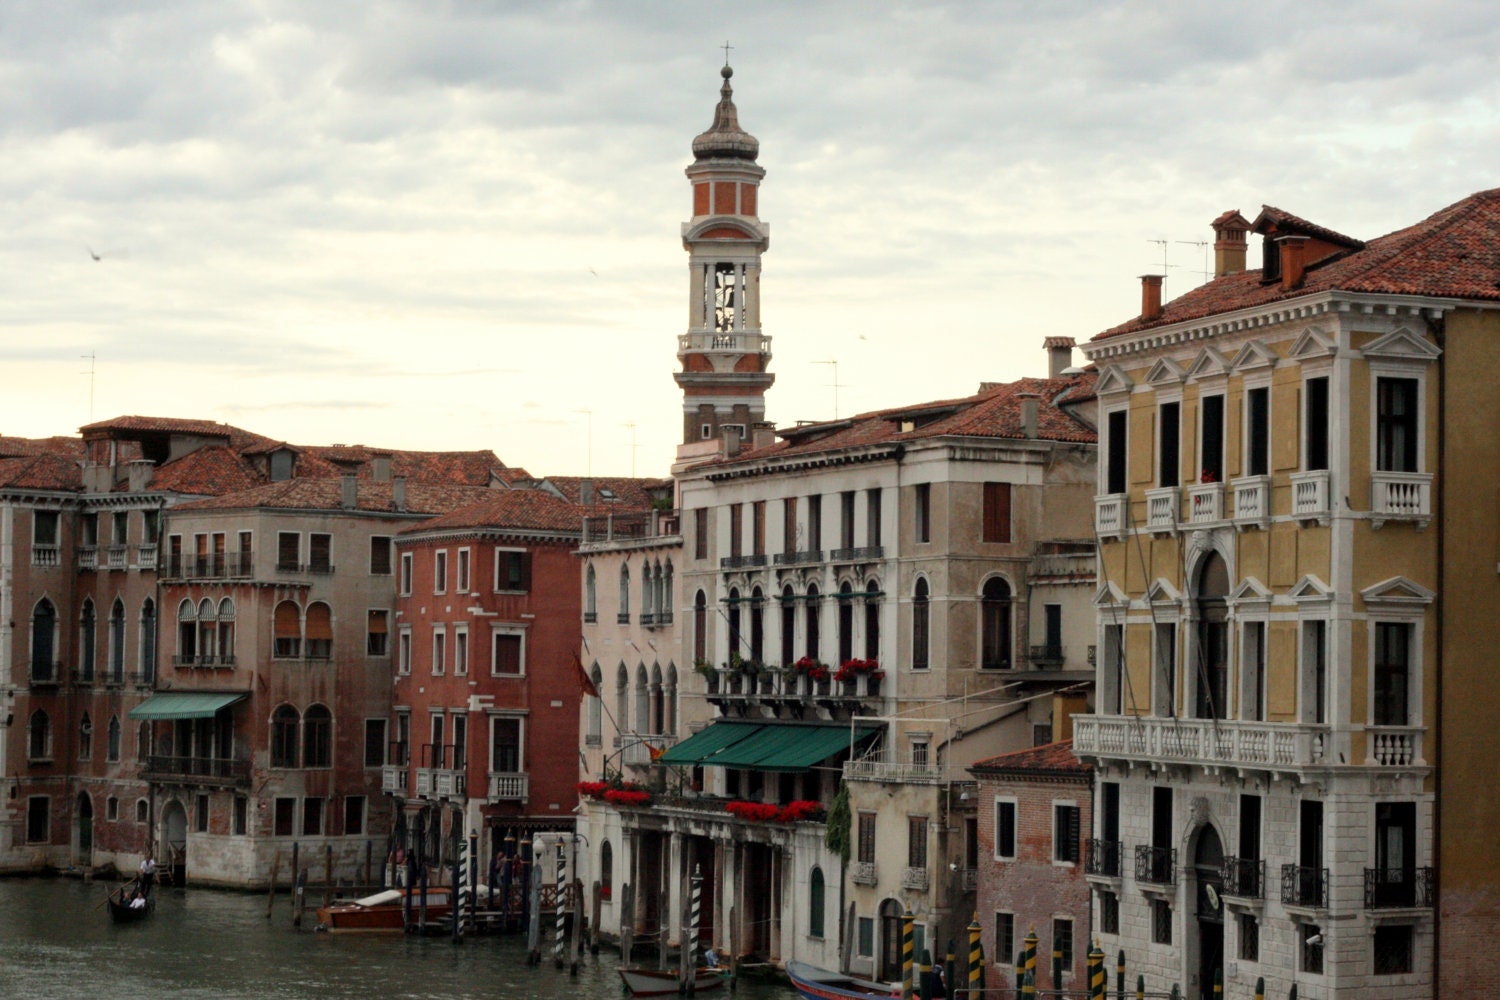 Venice, Italy Spire - 8x10 Print Matted to 11x14